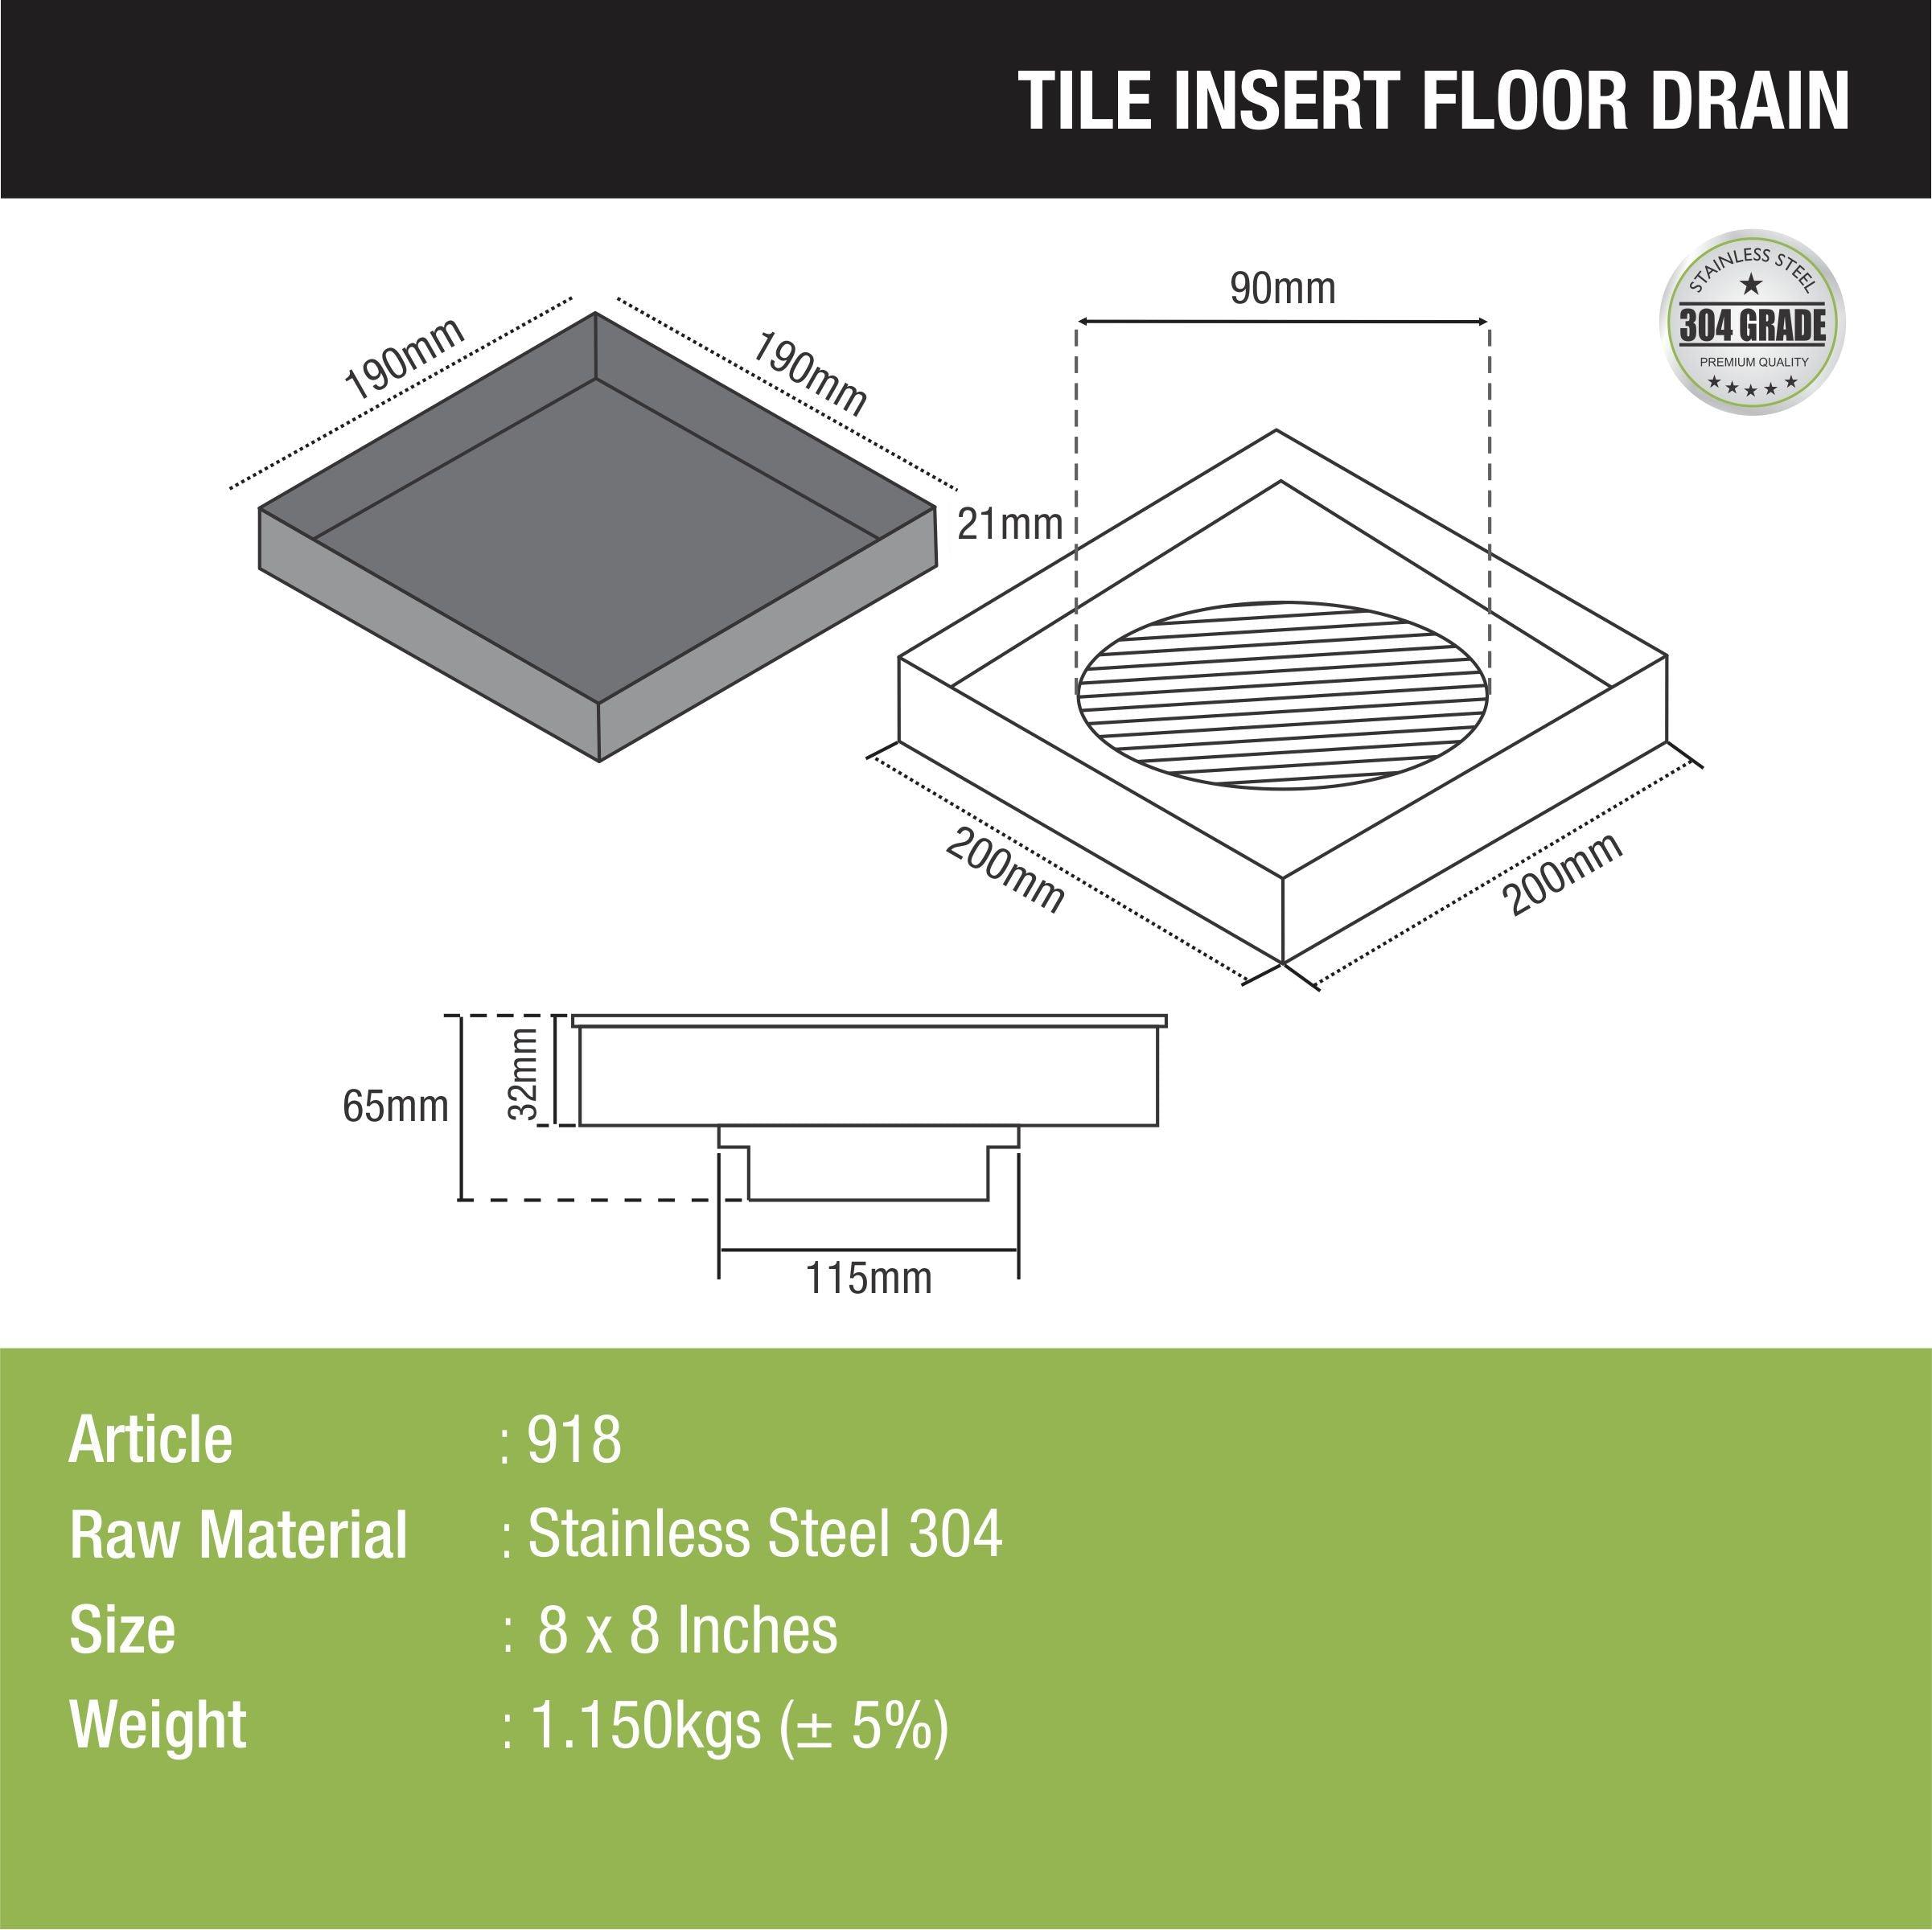 Tile Insert Floor Drain (8 x 8 Inches) sizes and dimensions